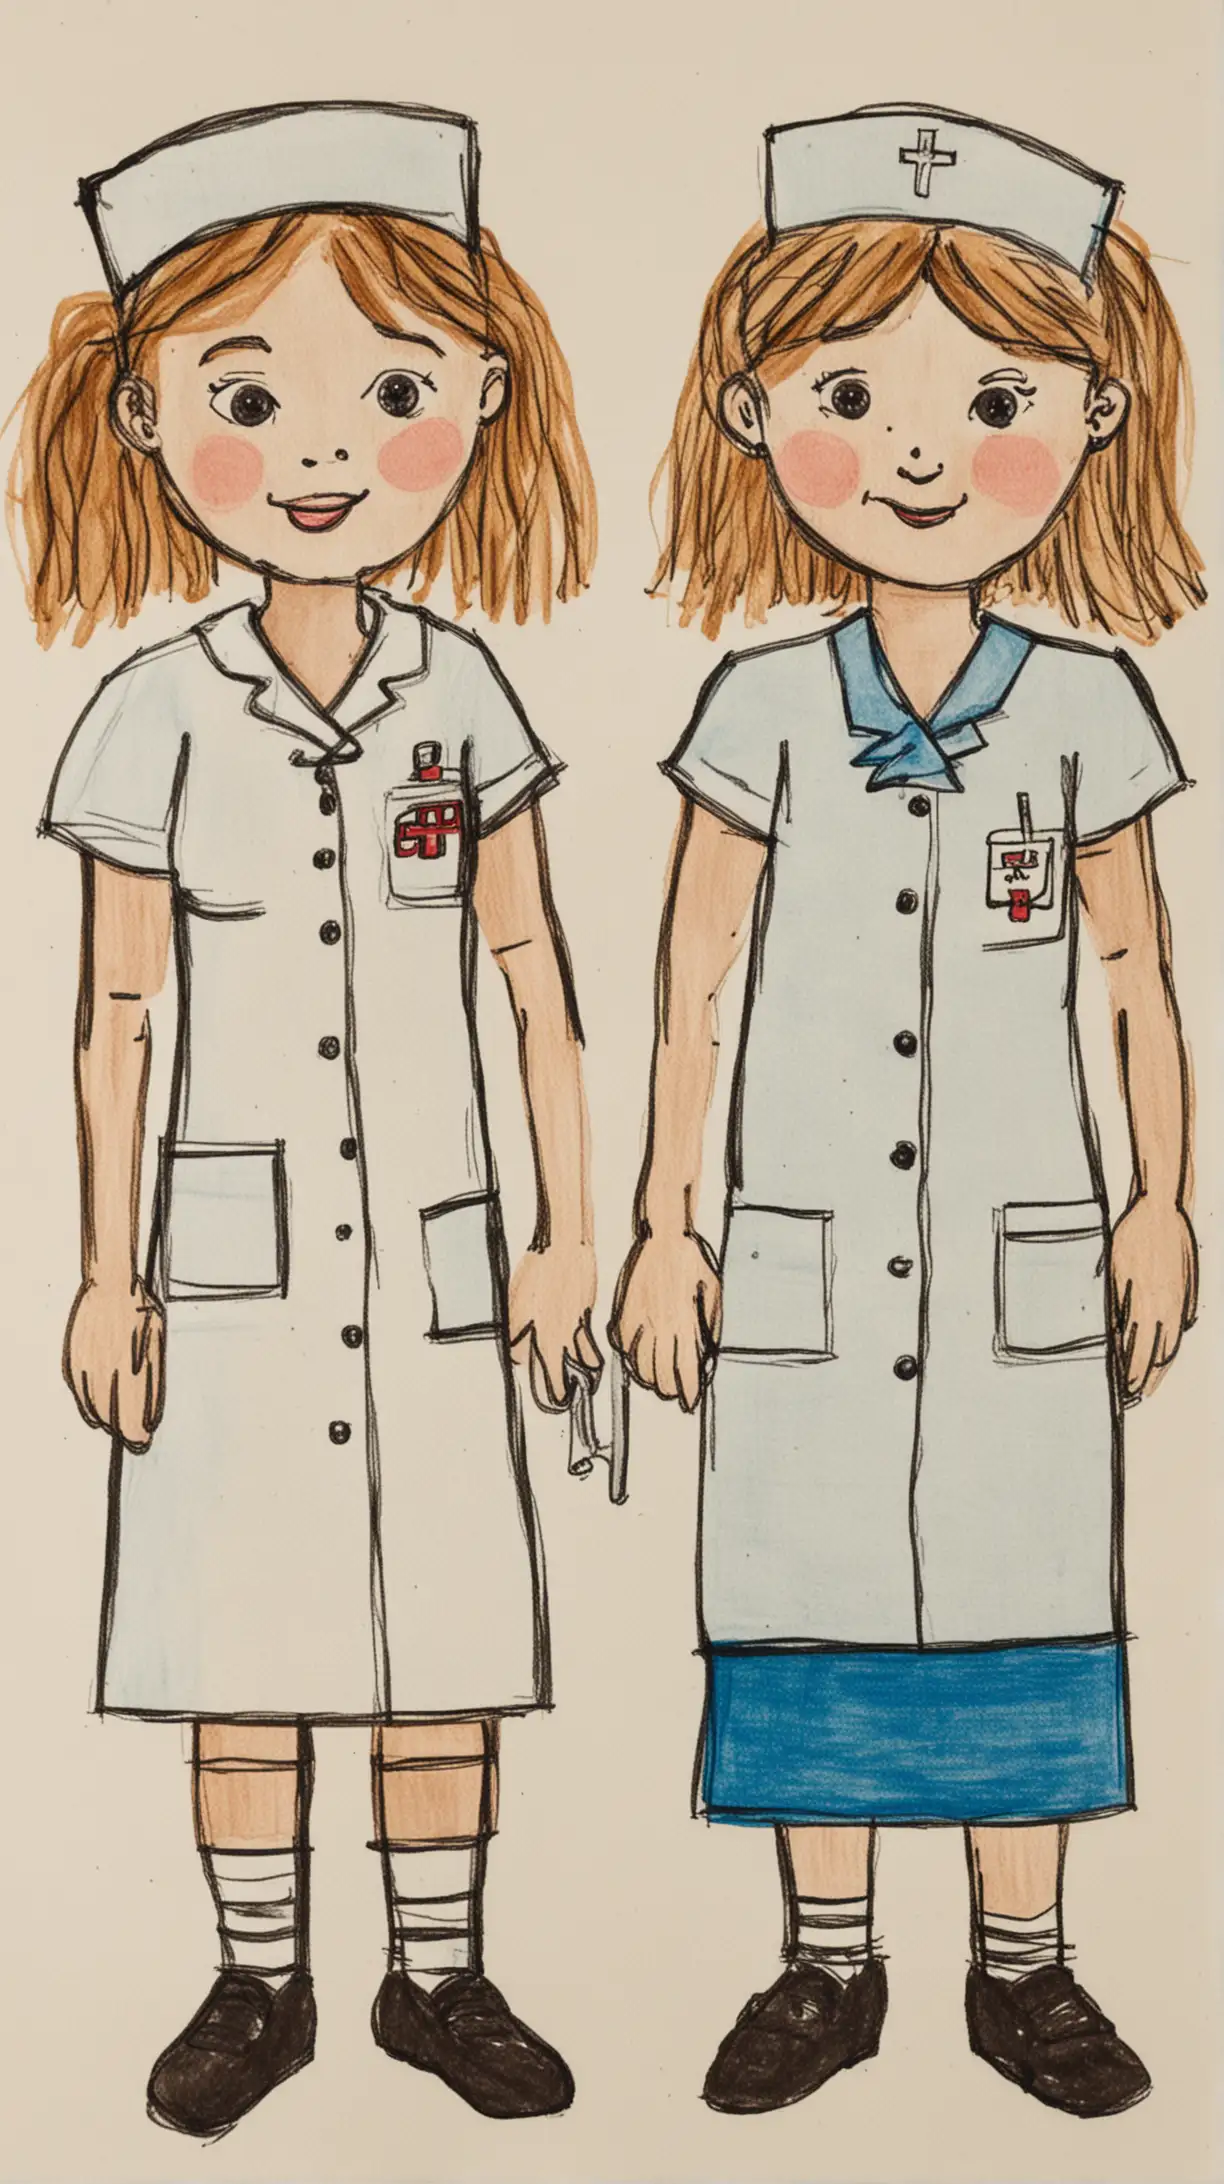 childs drawing of nurses
